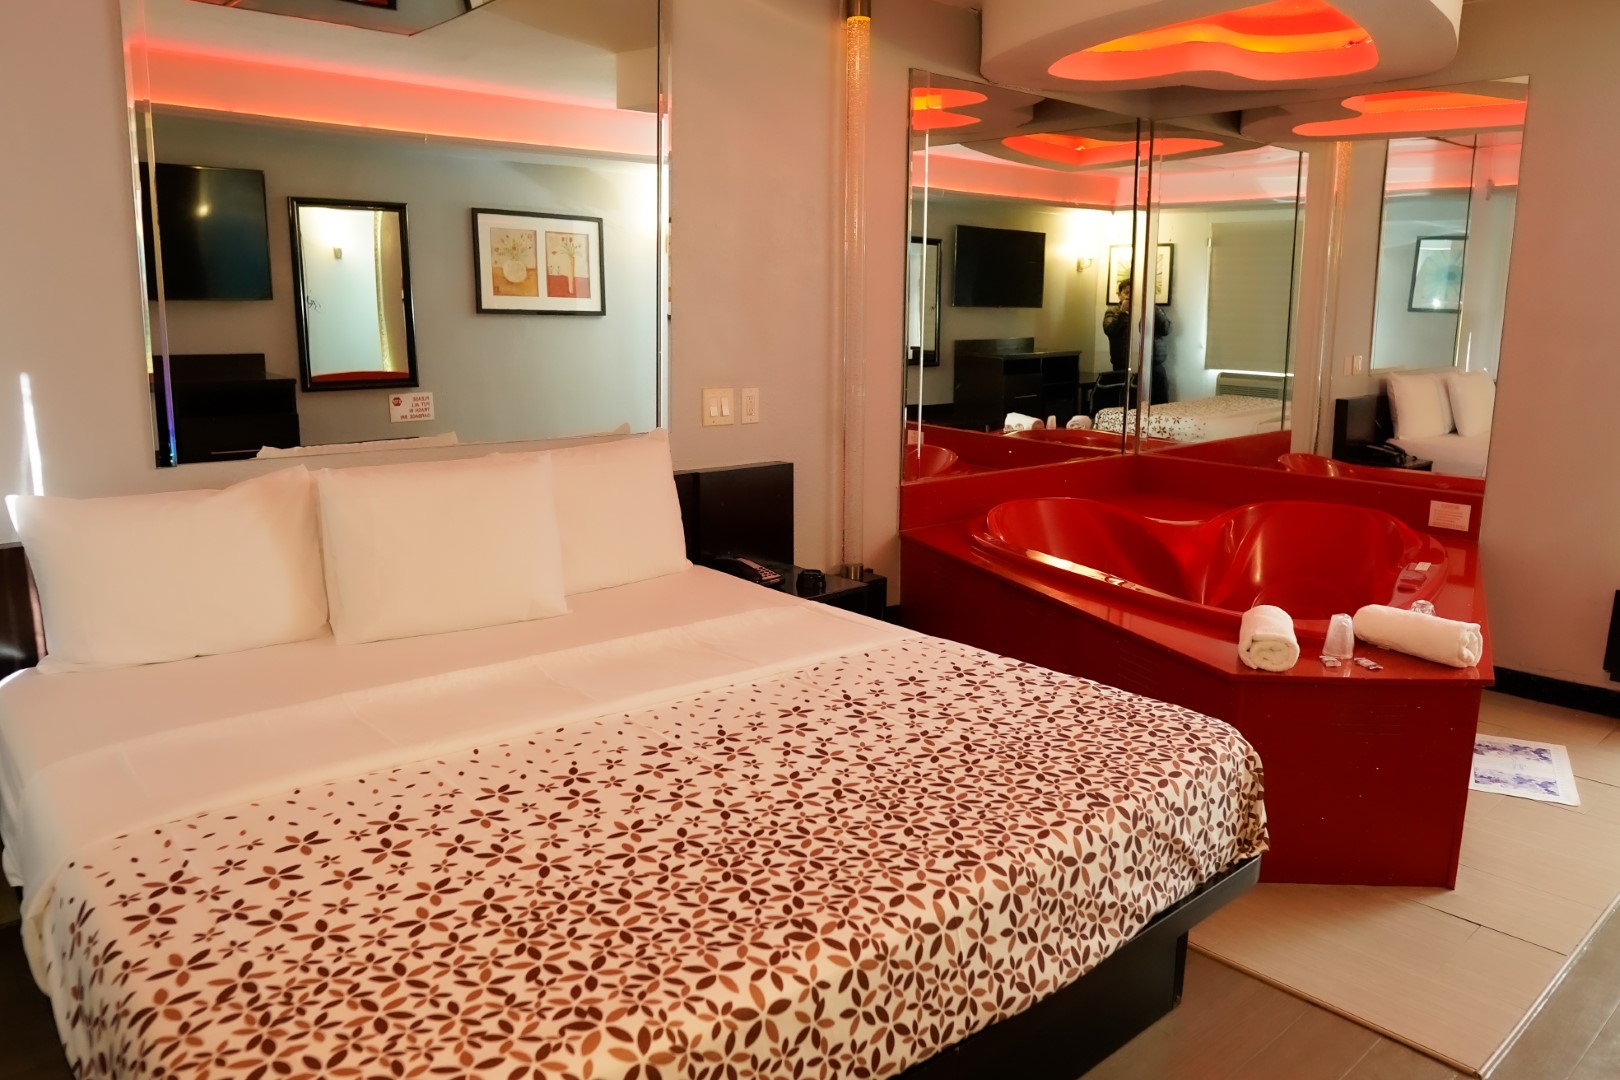 Hot Tub Room – Red